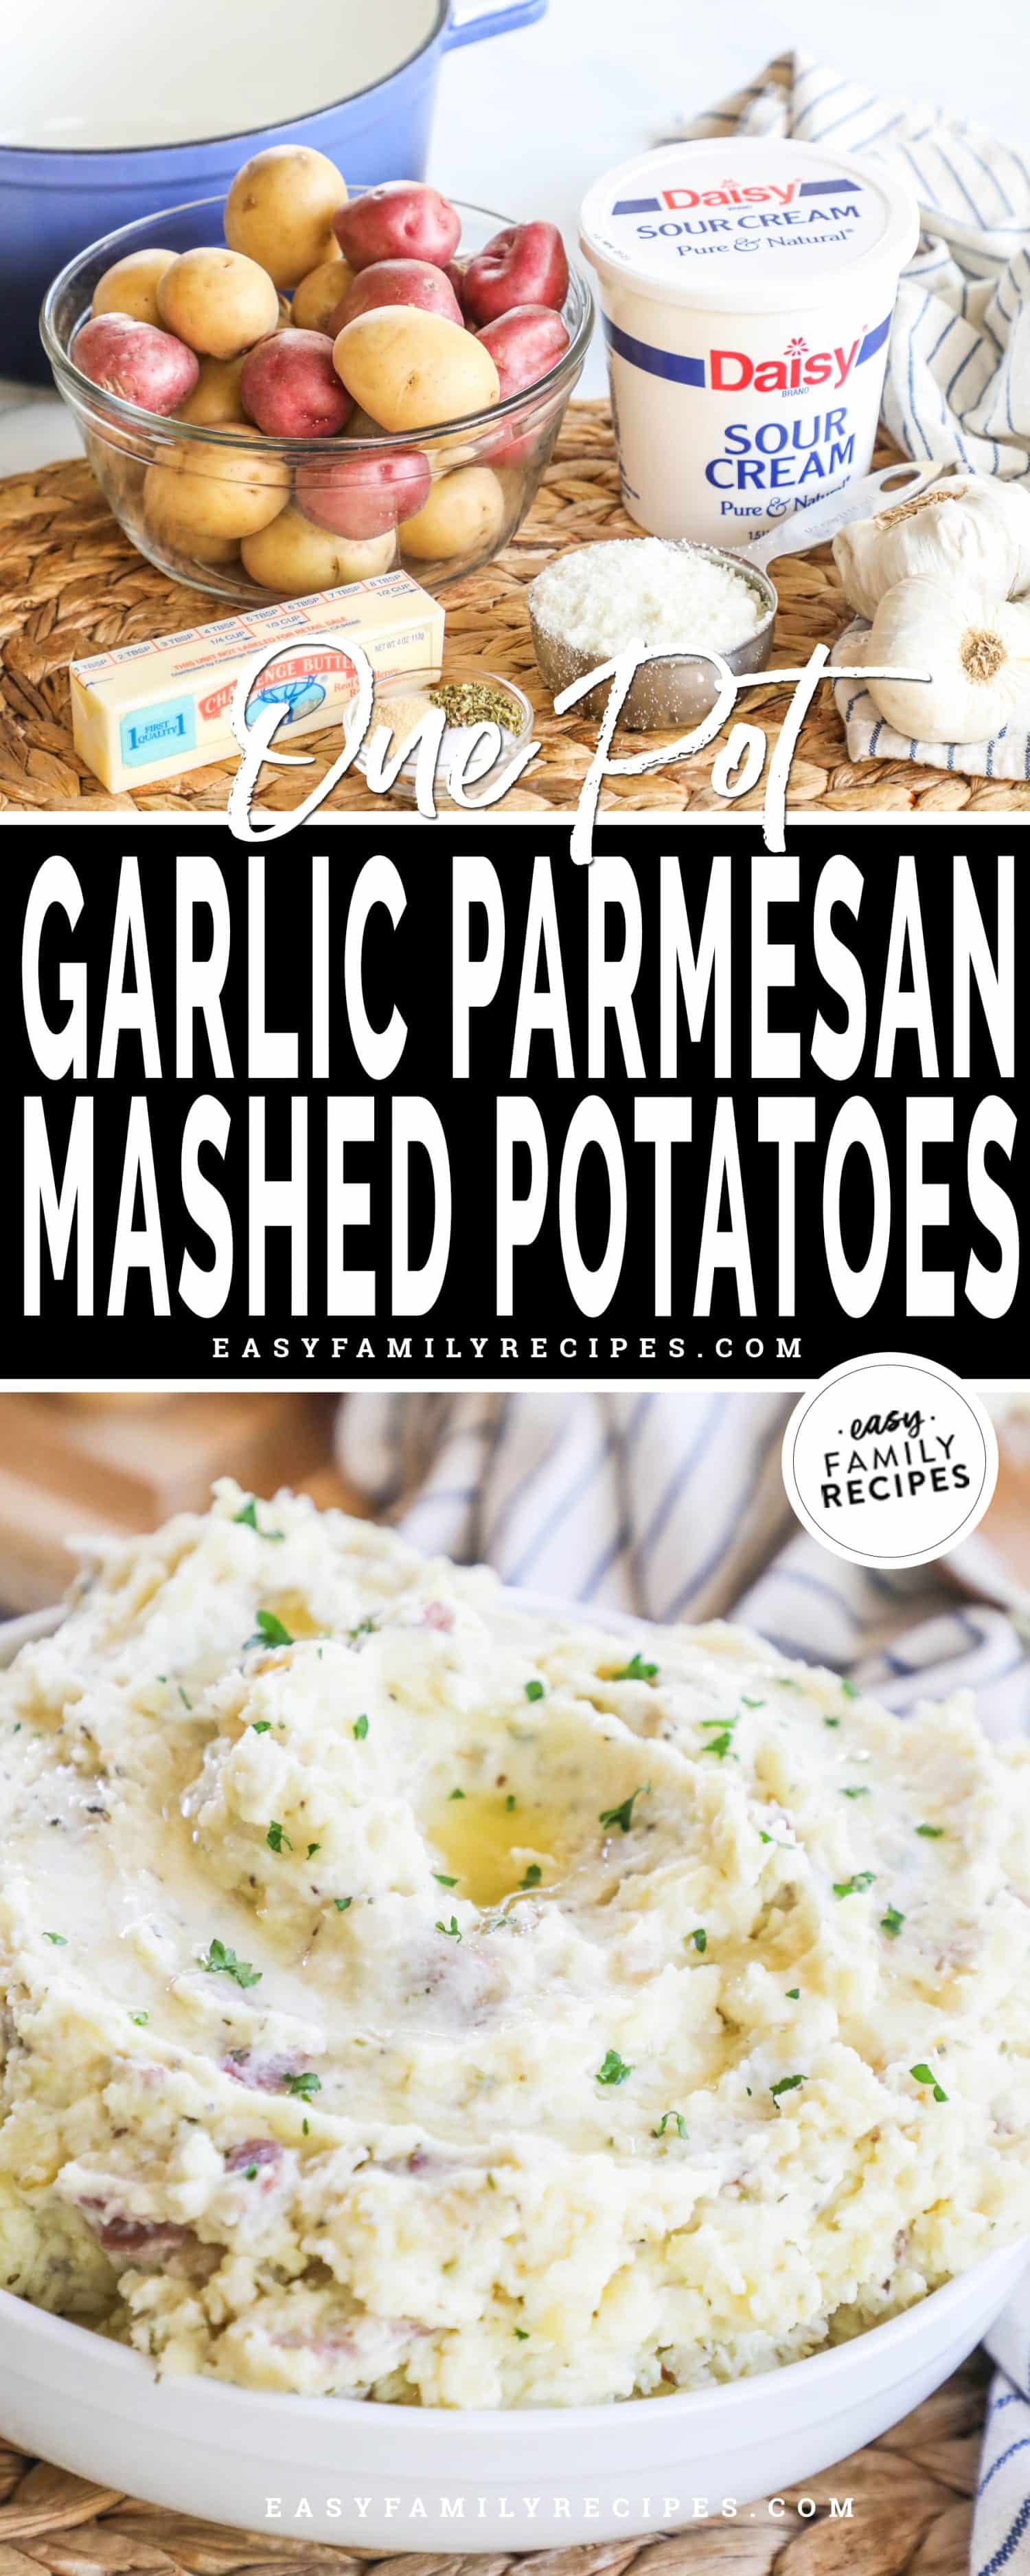 two images of mashed potatoes with mashed potato ingredients and a bowl piled with finished mashed potatoes.